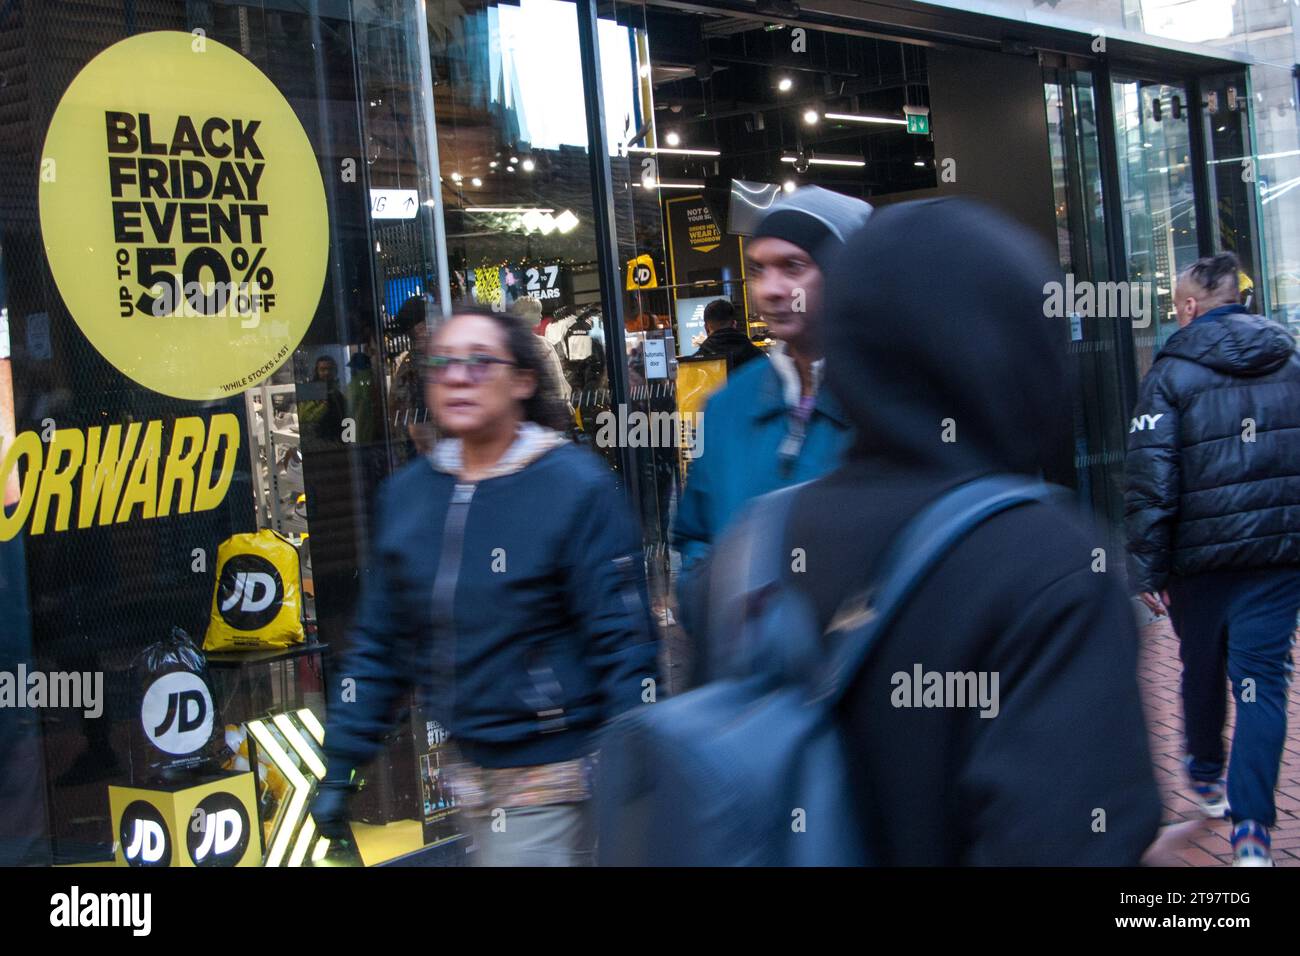 New Street, Birmingham November 23rd 2023 - Savvy shoppers in Birmingham's city centre get early Black Friday deals in before the rush on Friday. Pic by Credit: Stop Press Media/Alamy Live News Stock Photo